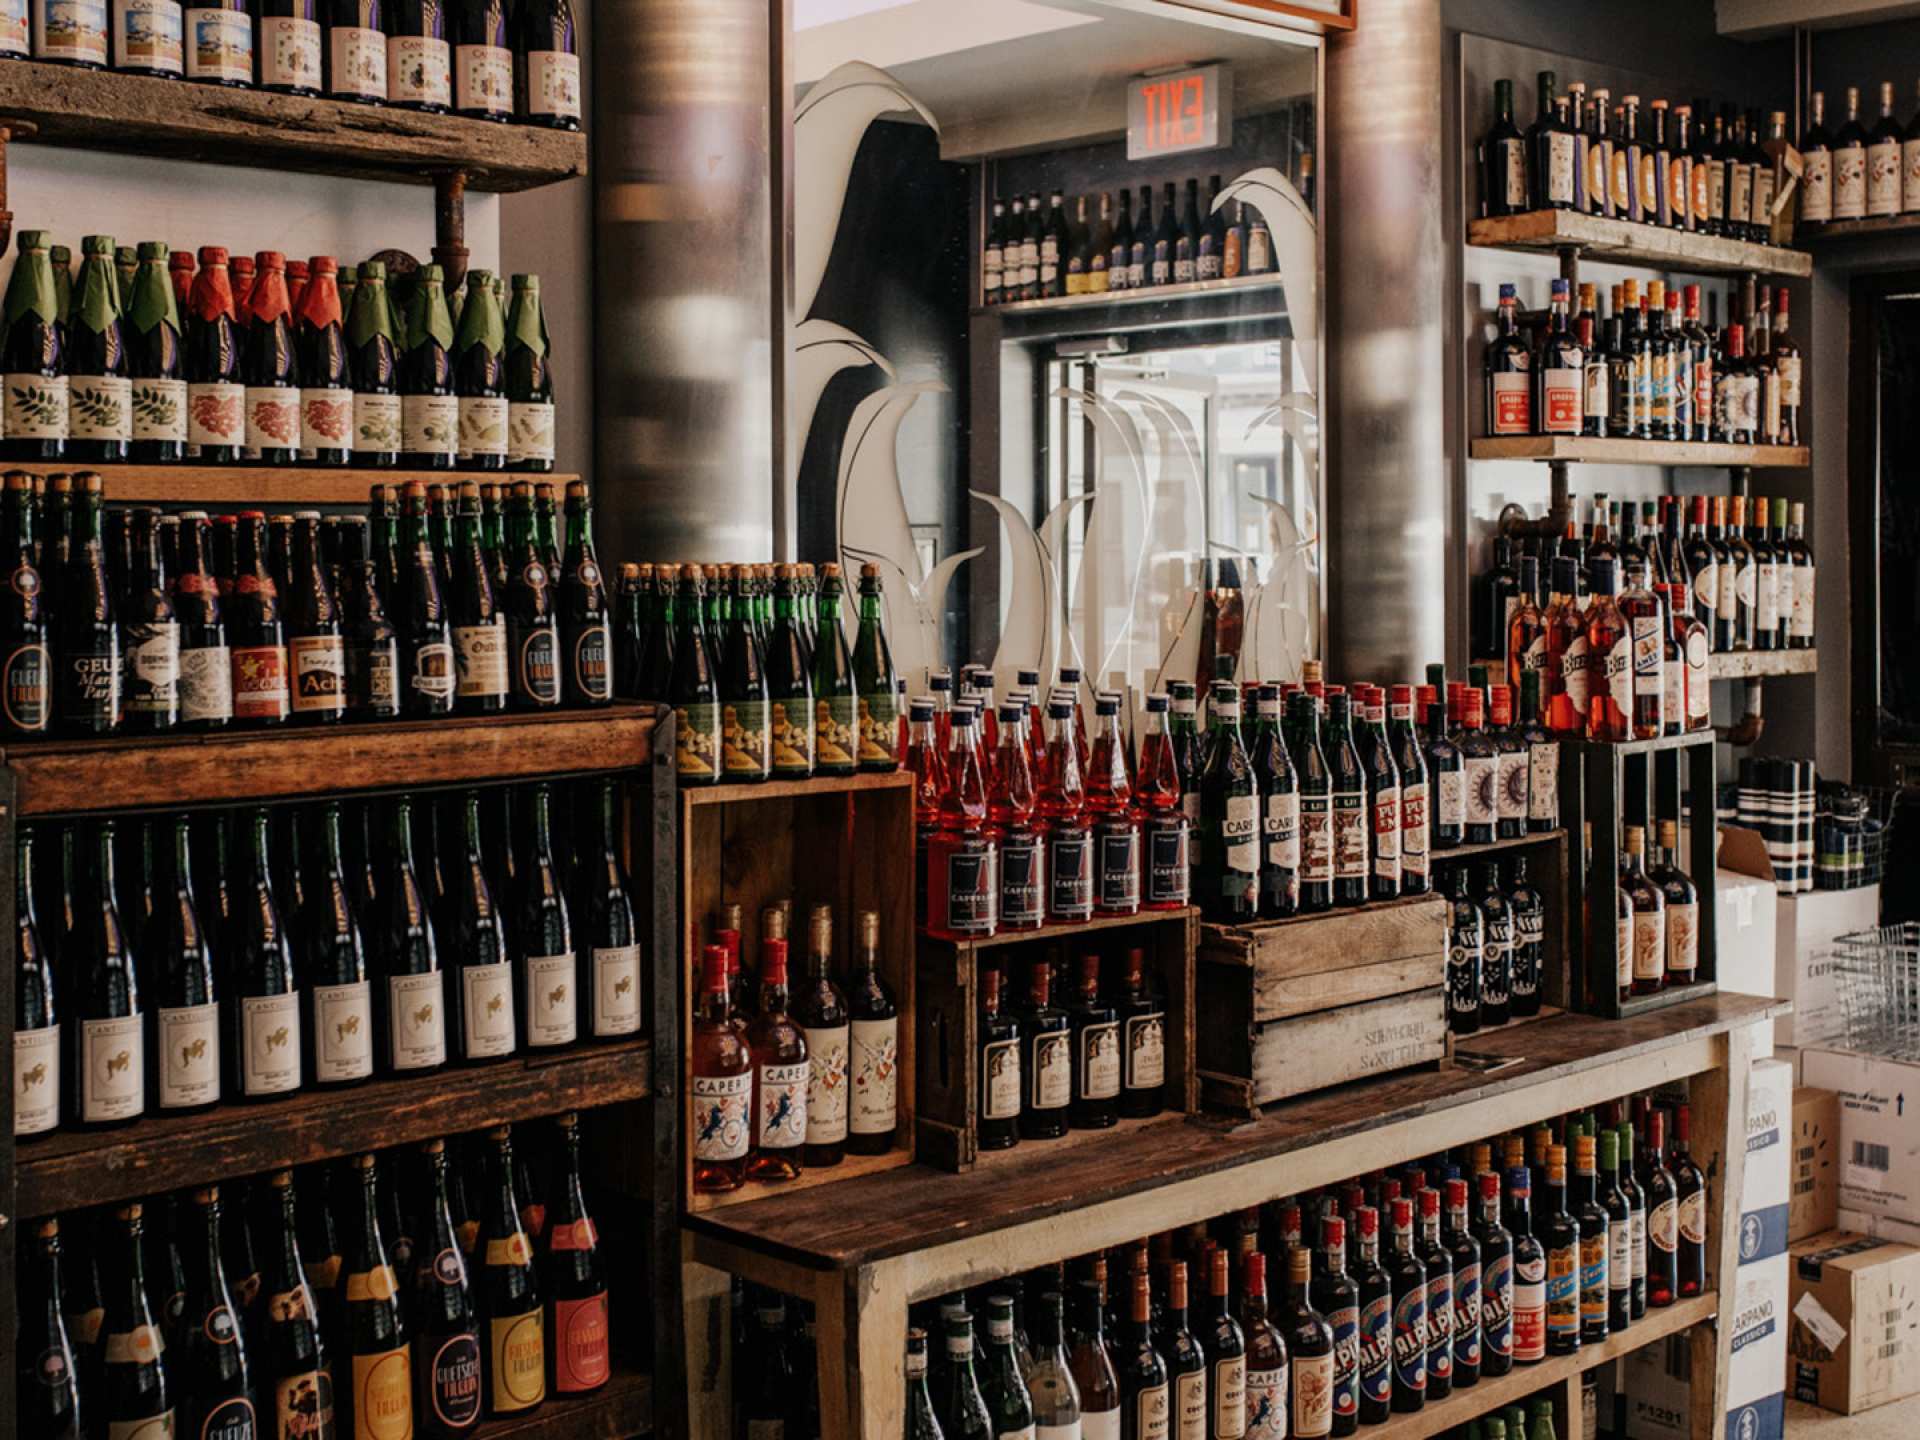 Toronto bottle shops and alcohol stores | Neatly stacked wine shelves at Bottega Volo